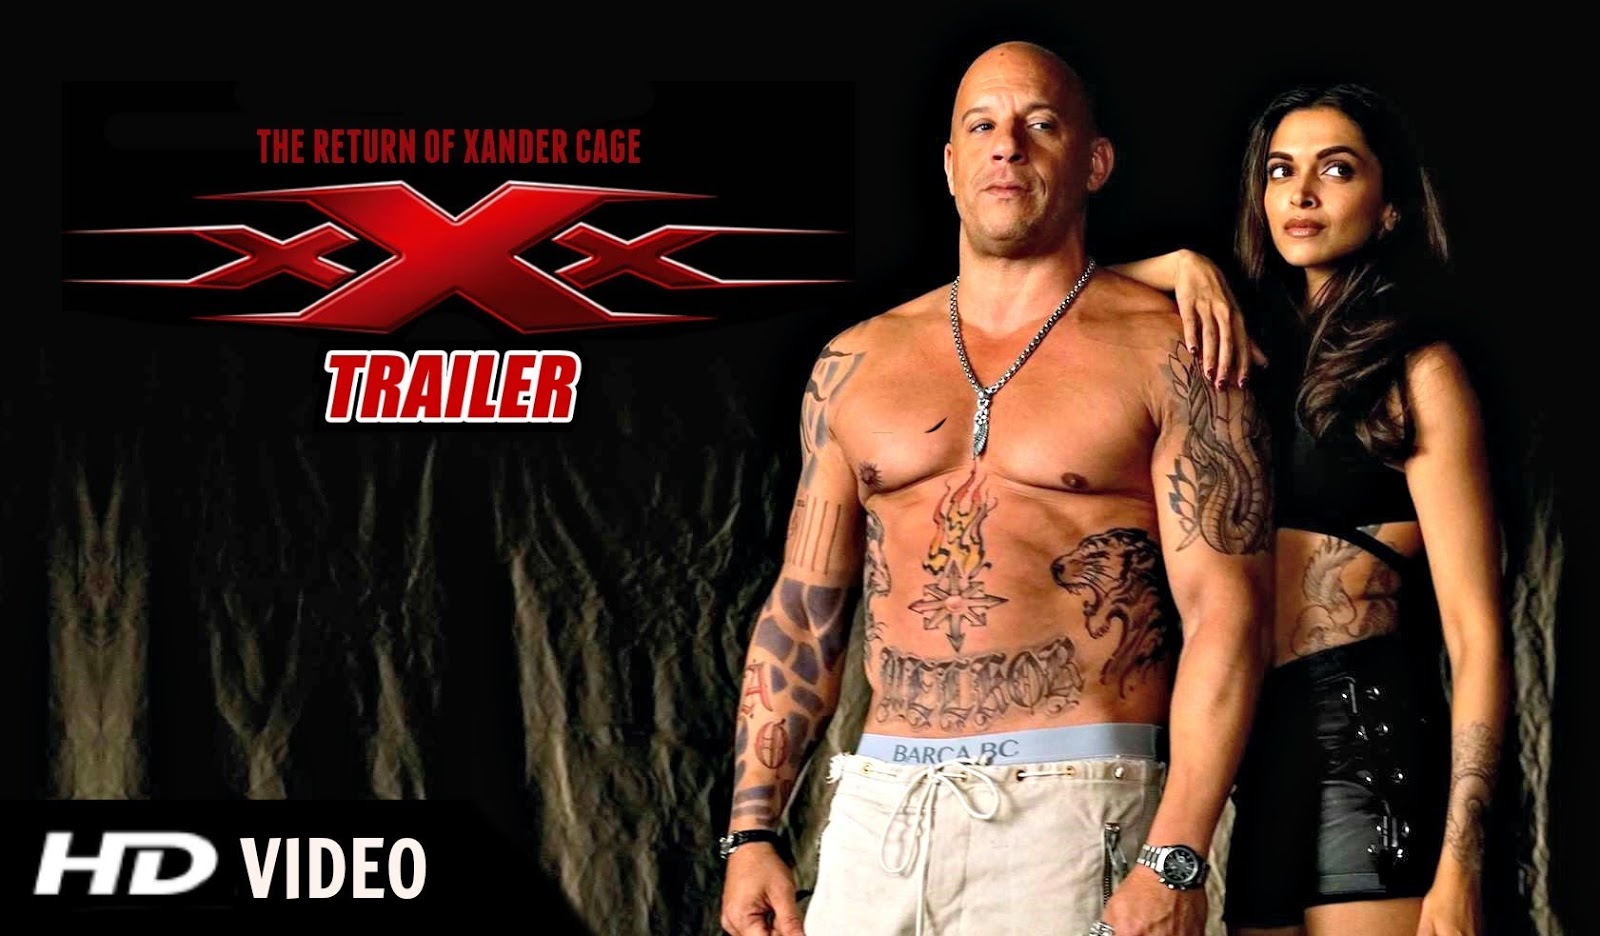 xXx - The Return of Xander Cage 2017 HD Official Trailer 720p Full Theatrical Trailer Free Download And Watch Online at downloadhub.in